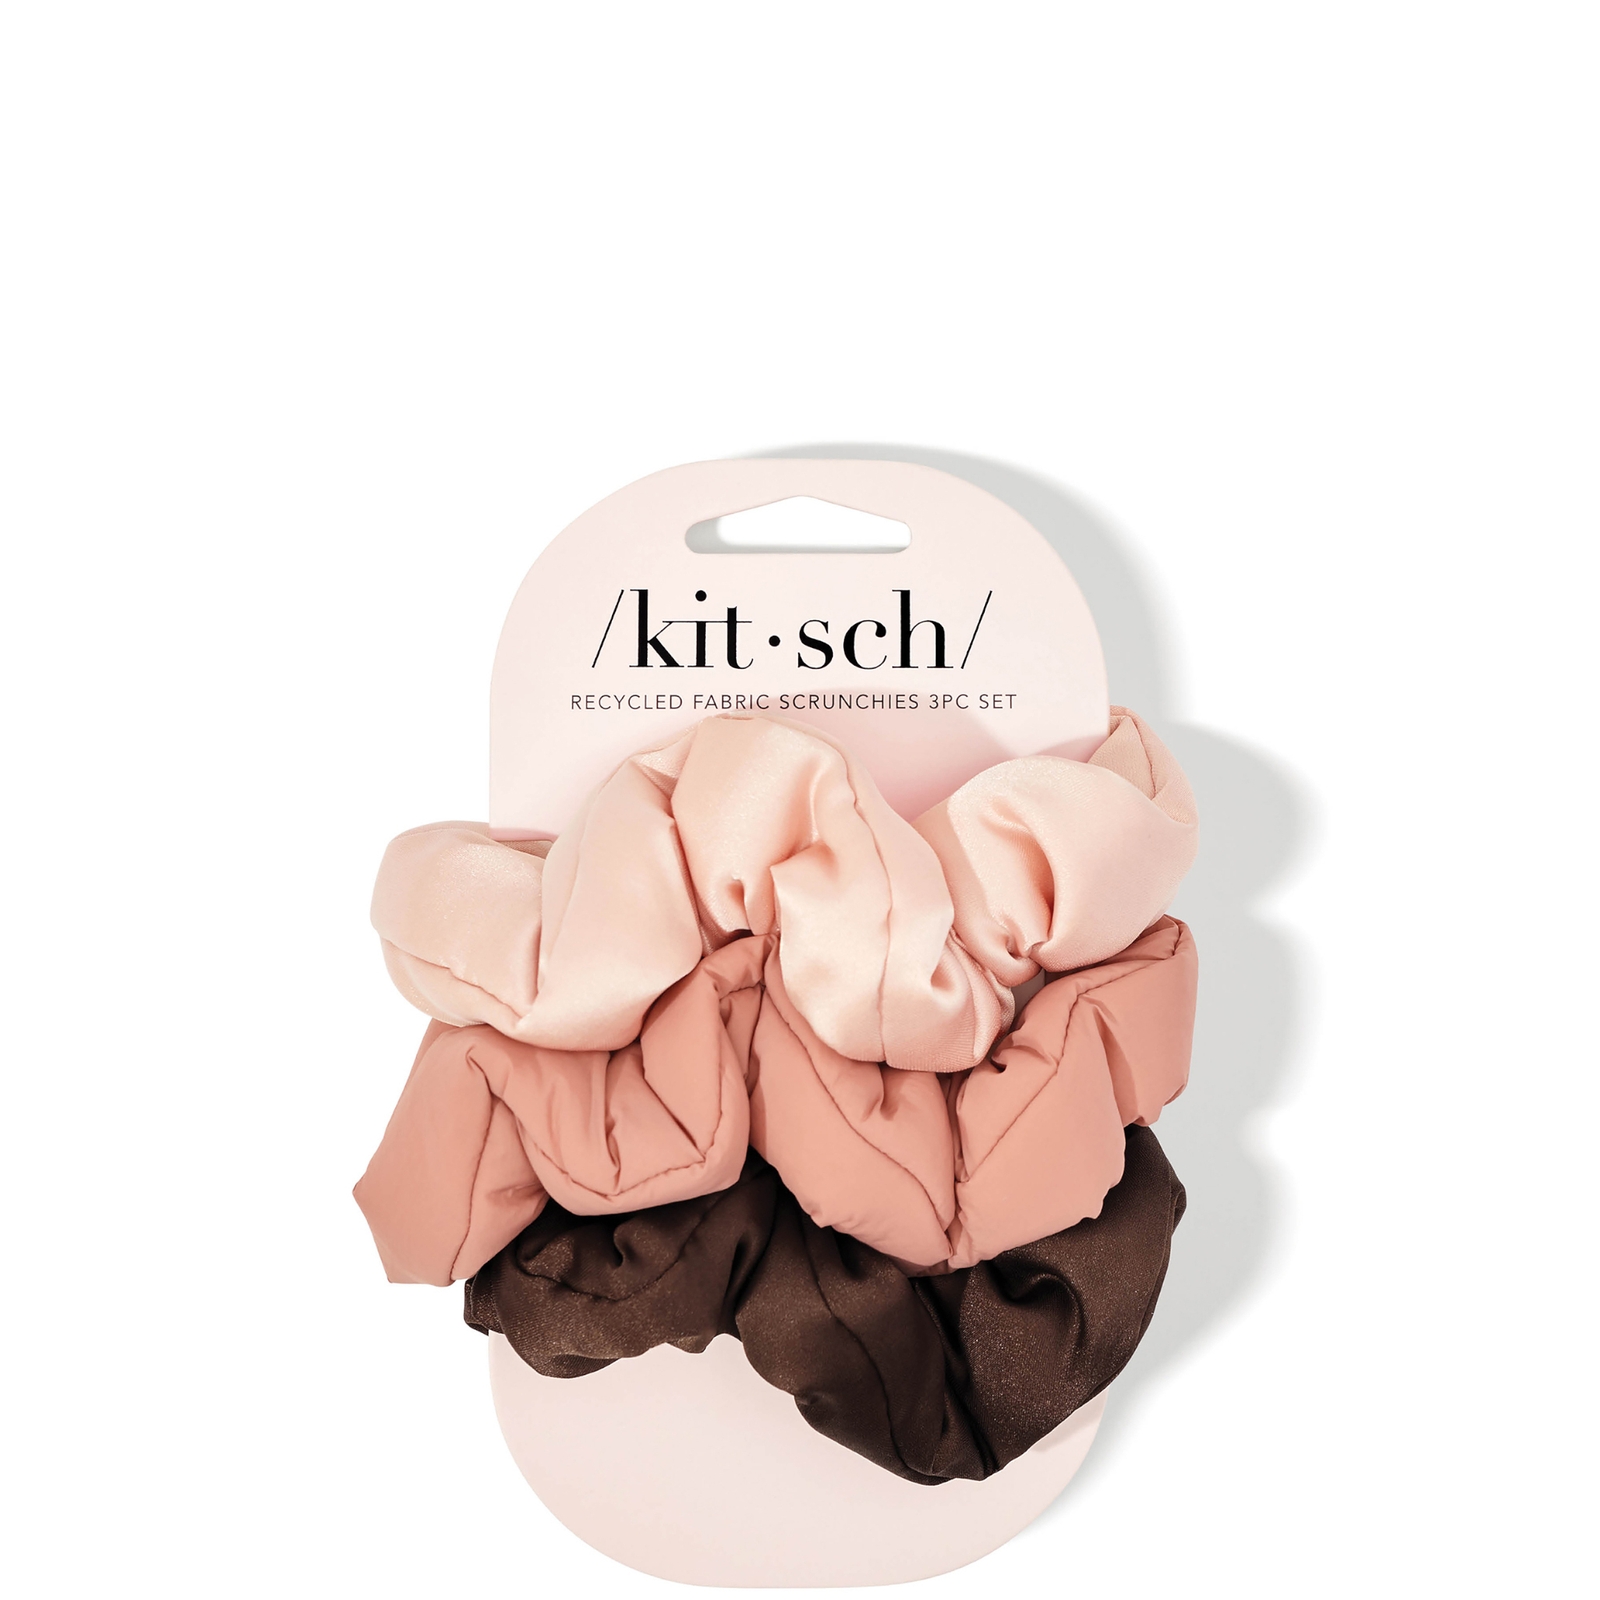 Shop Kitsch Recycled Fabric Puffy Scrunchies 3 Piece Set - Rosewood